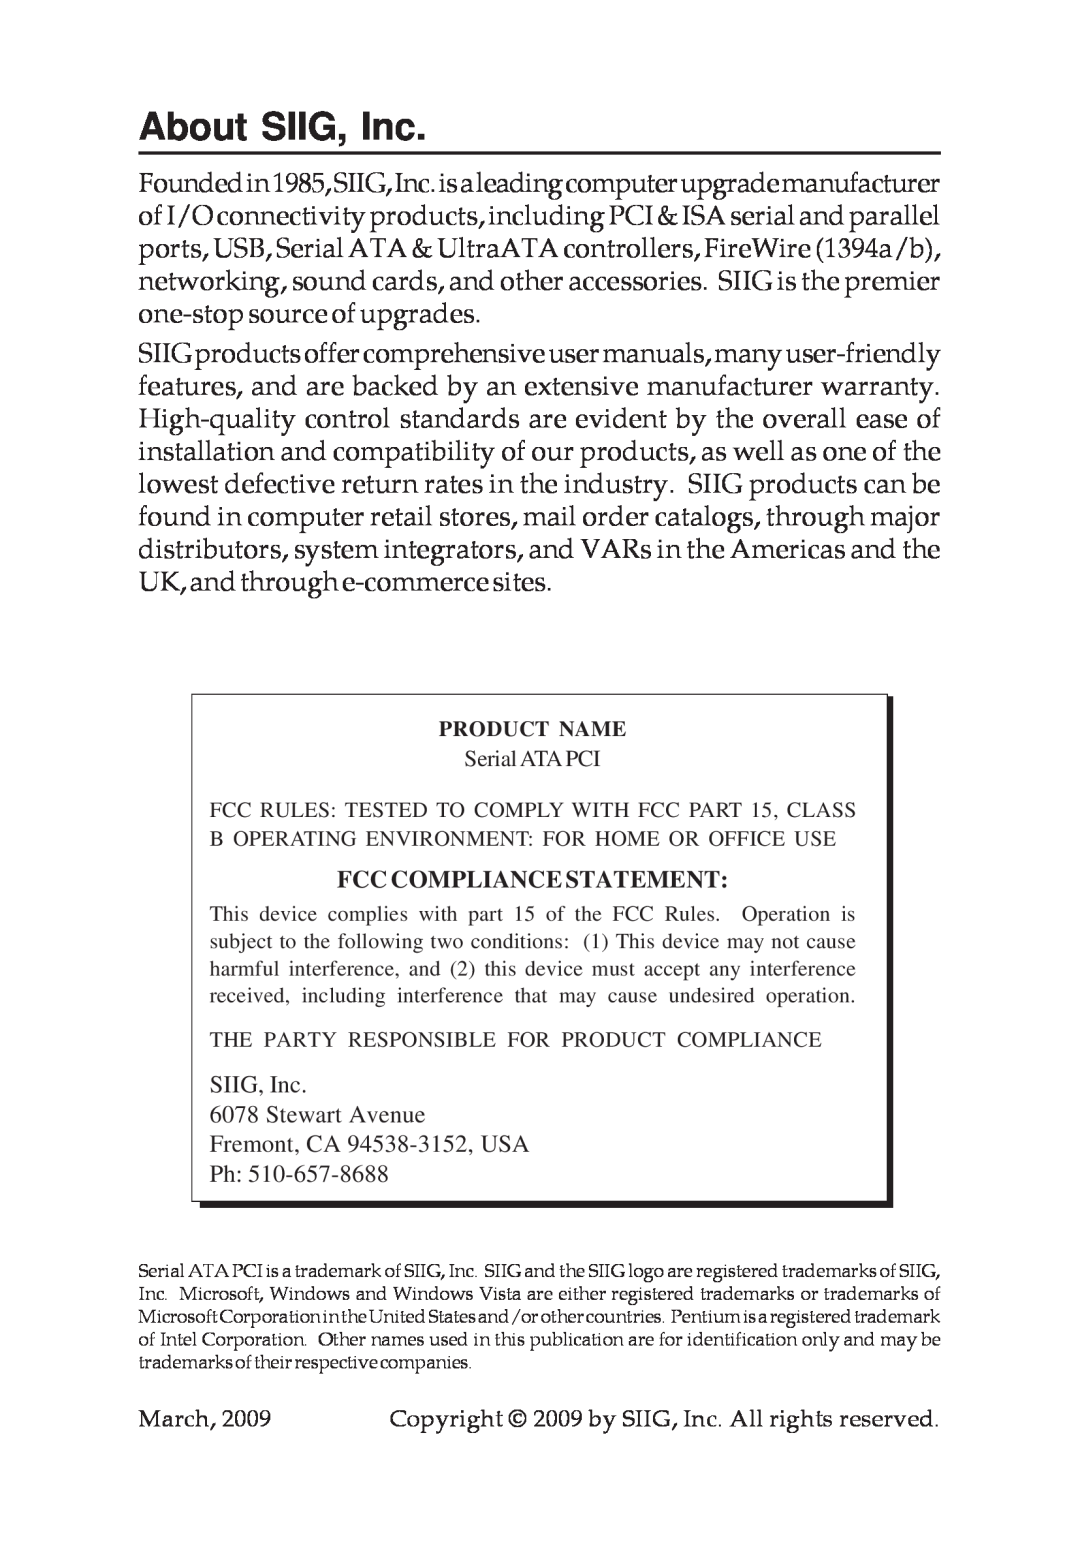 SIIG 04-0265F specifications About SIIG, Inc, Fcc Compliance Statement 